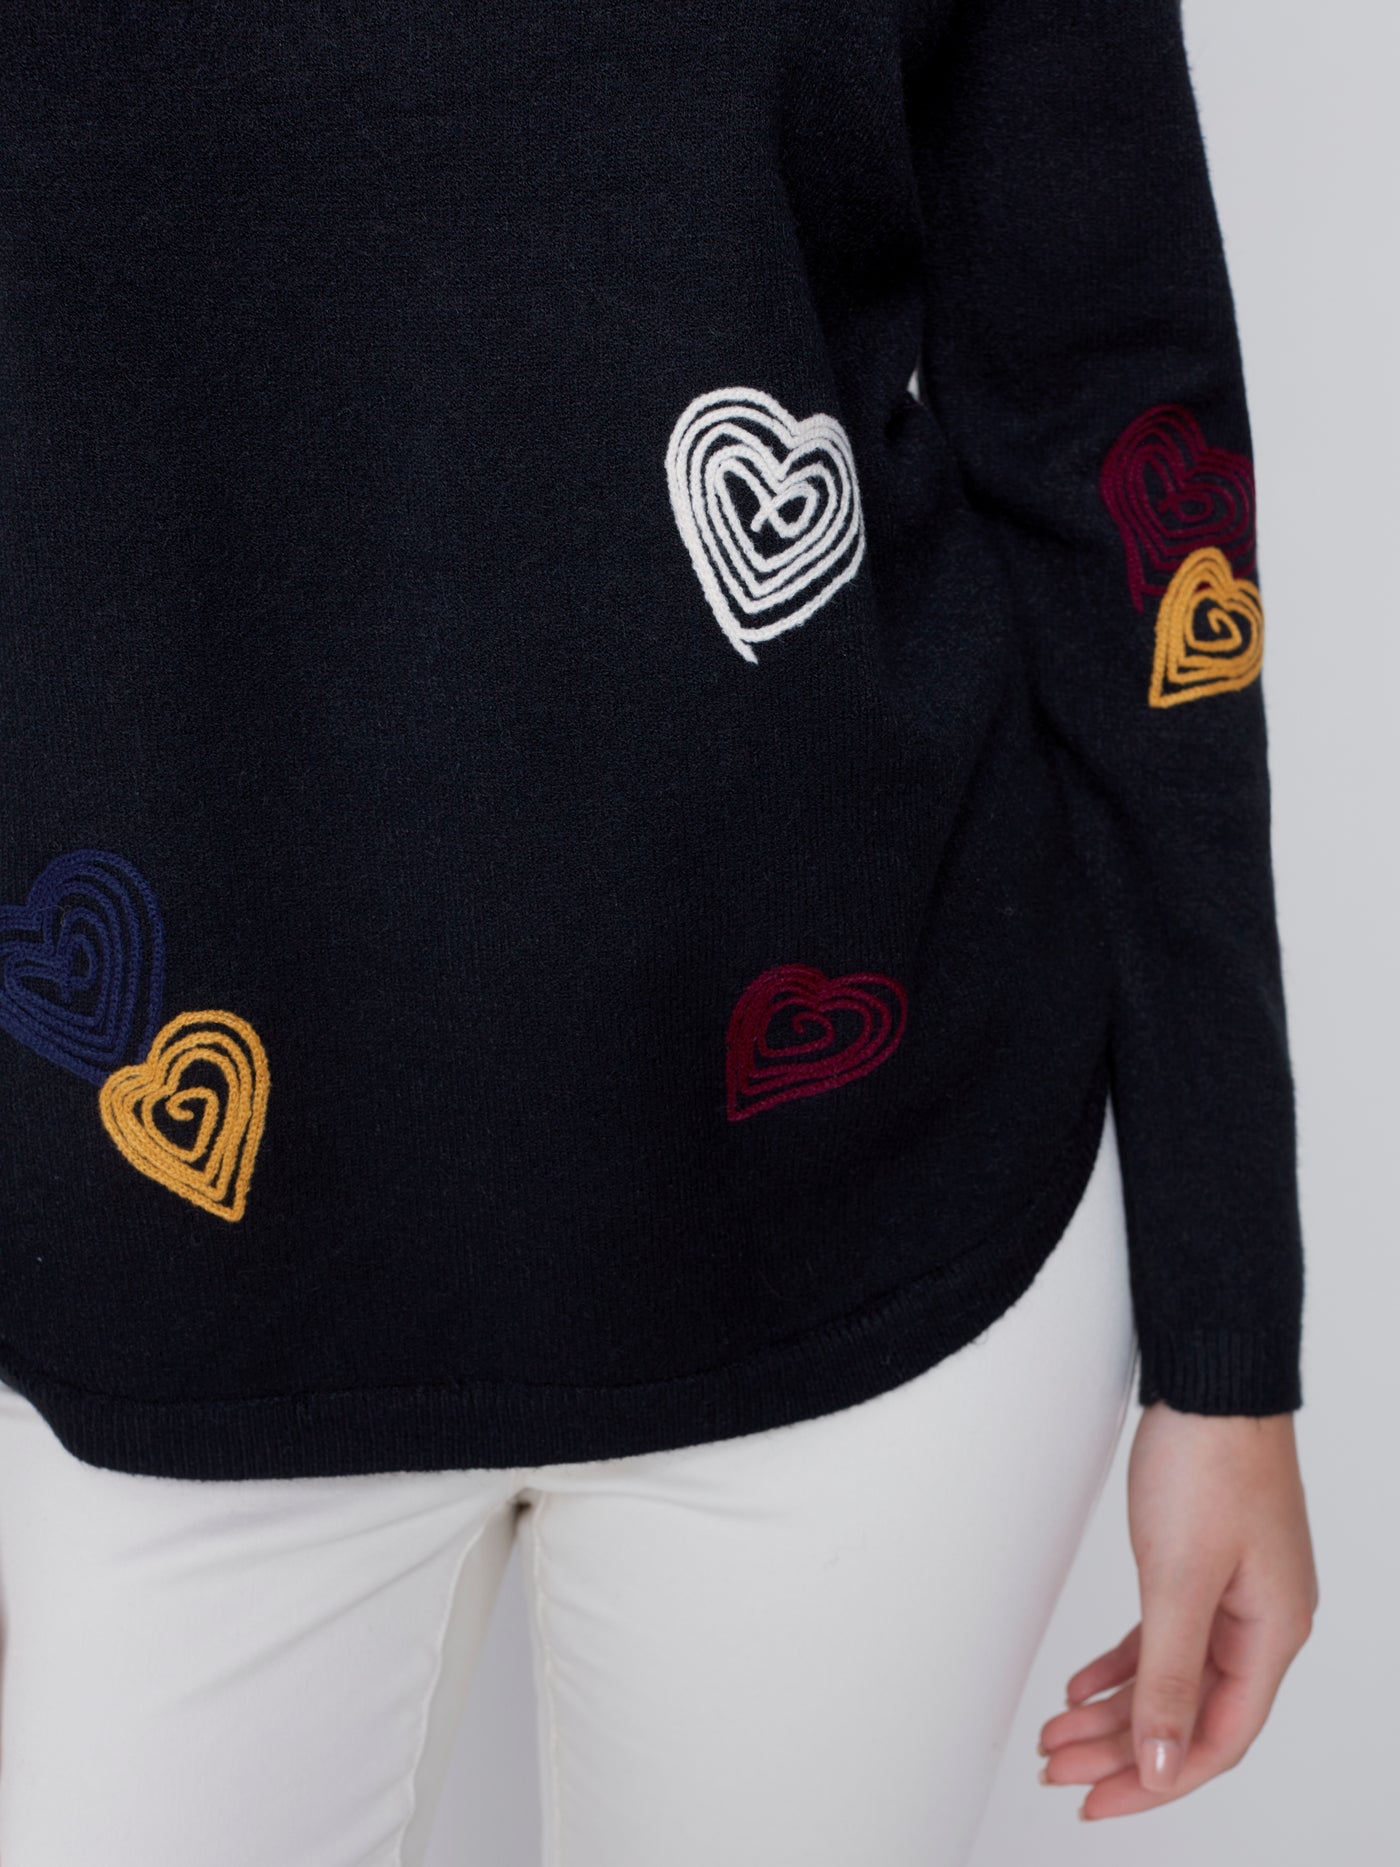 Black Multi Heart Embroidered Sweater